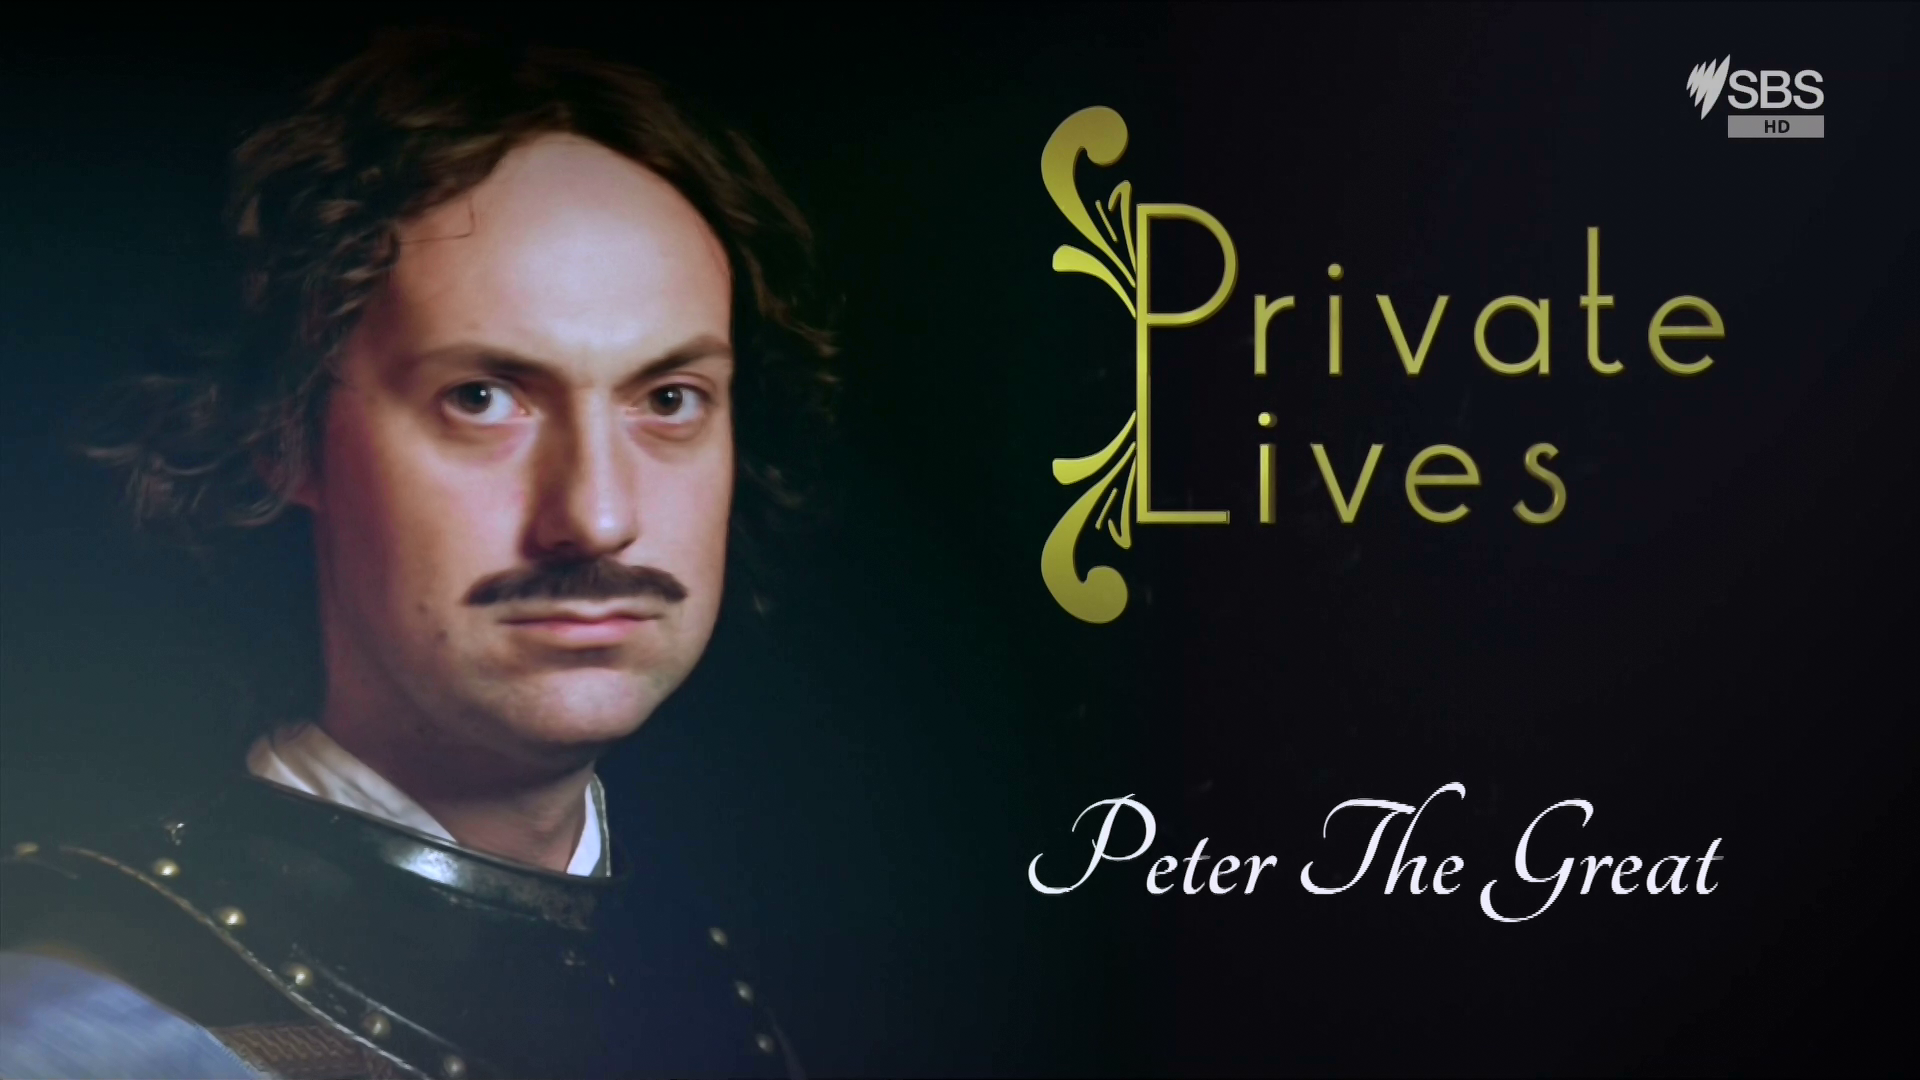 Private Lives 2019 S01E05 Peter The Great 1080p